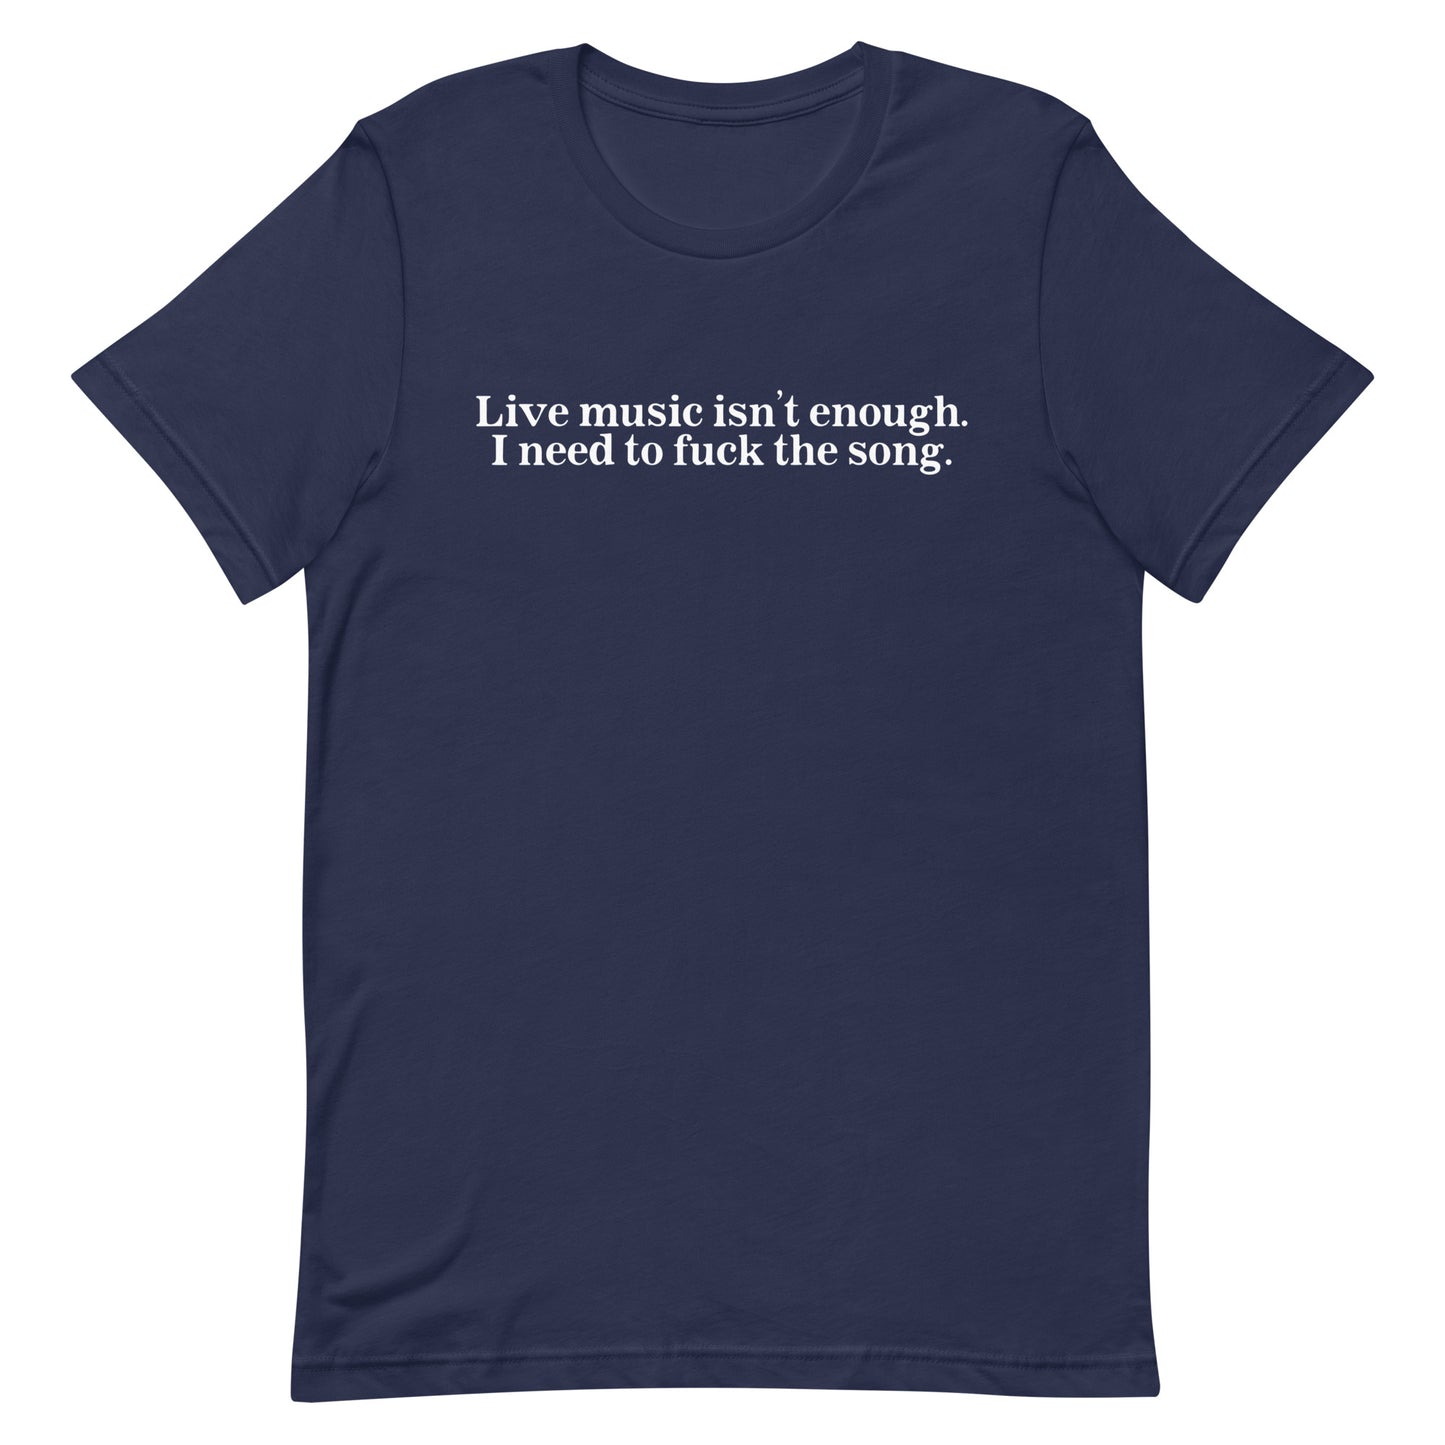 Live Music Isn't Enough. I Need to Fuck the Song. Unisex t-shirt